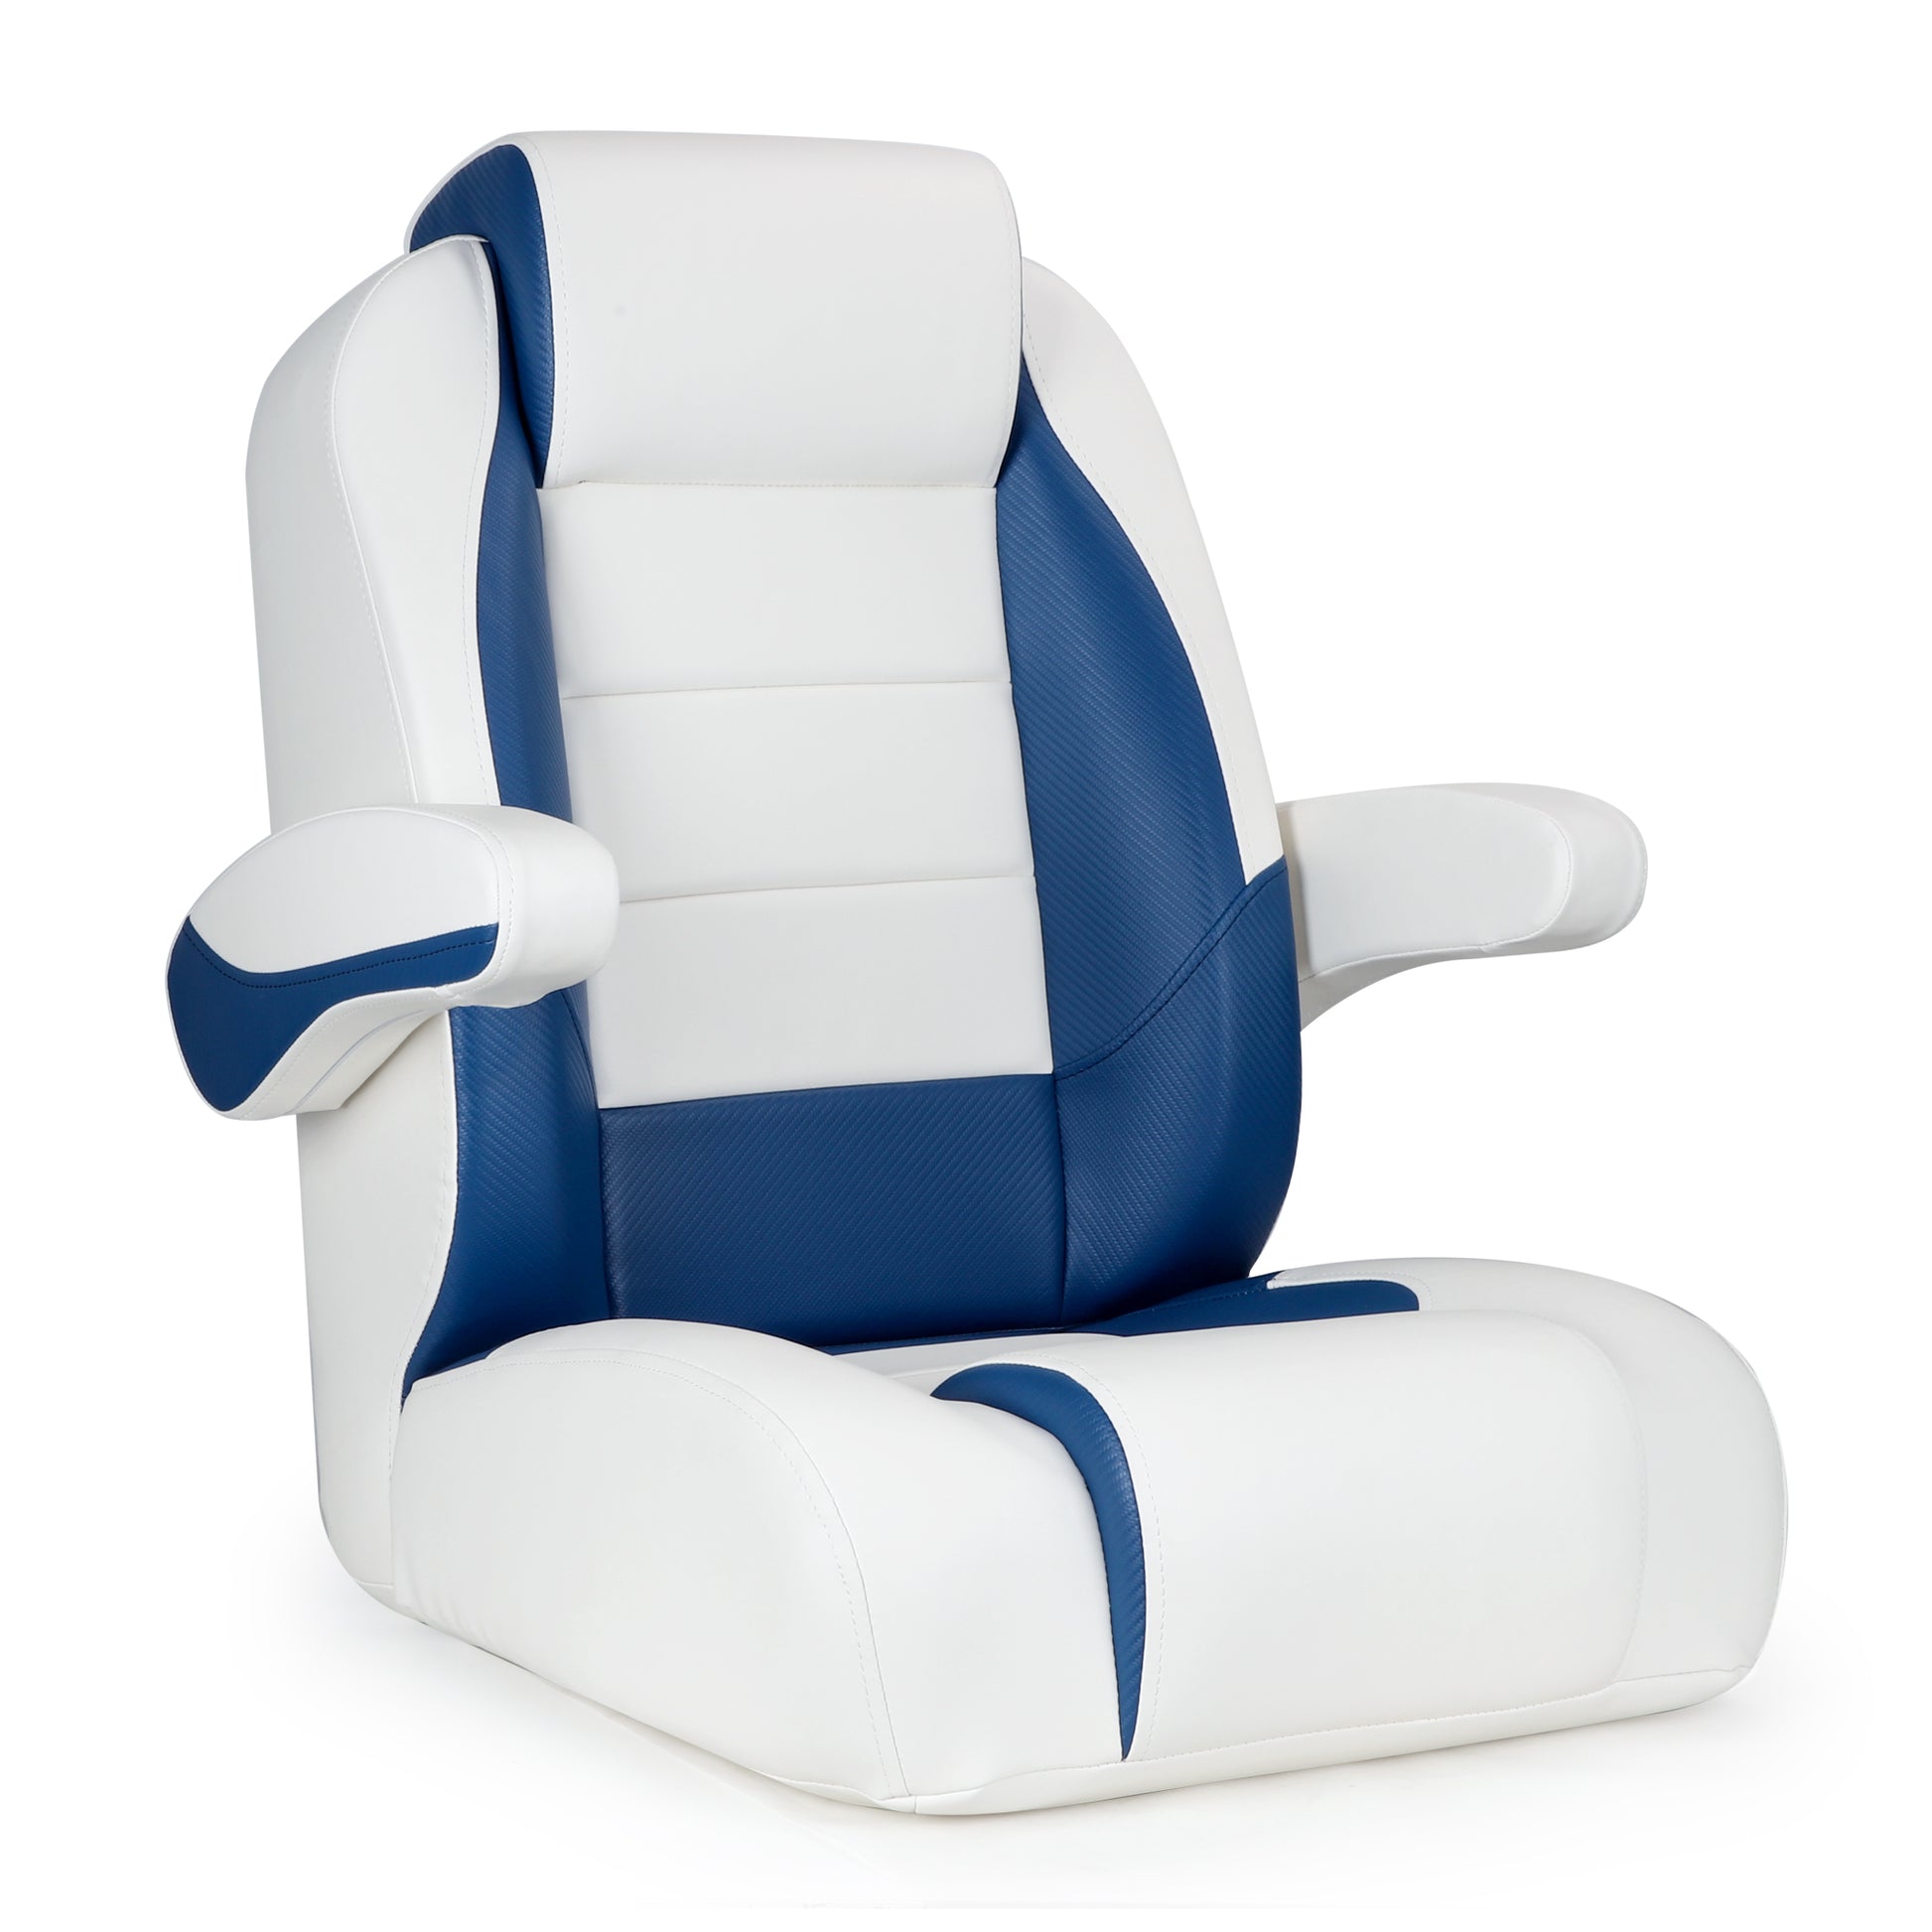 NORTHCAPTAIN Premium Reclining Pontoon Captain's Chair Boat Bucket Seat with Armrest,White